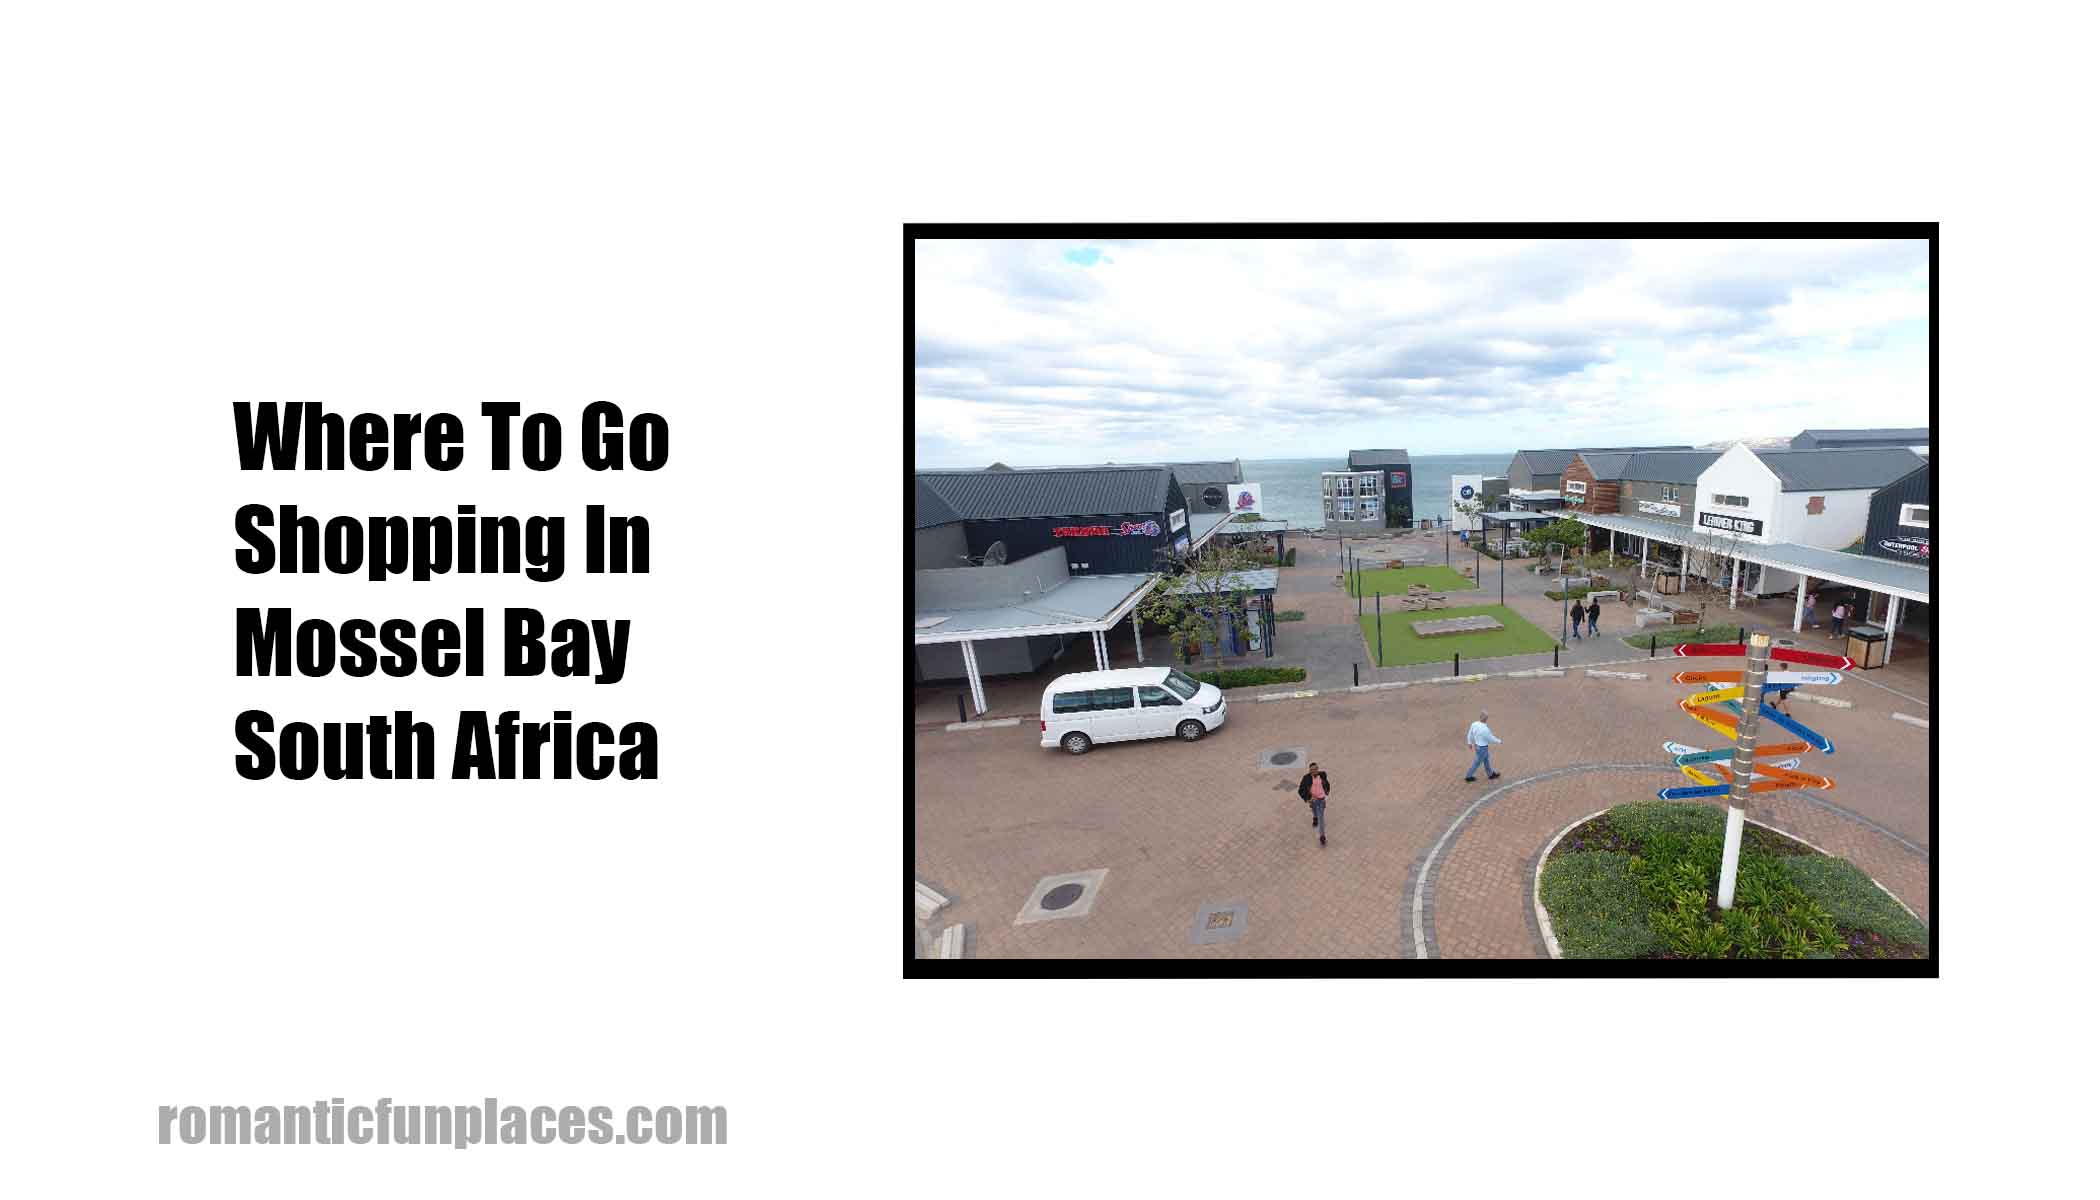 Where To Go Shopping In Mossel Bay South Africa